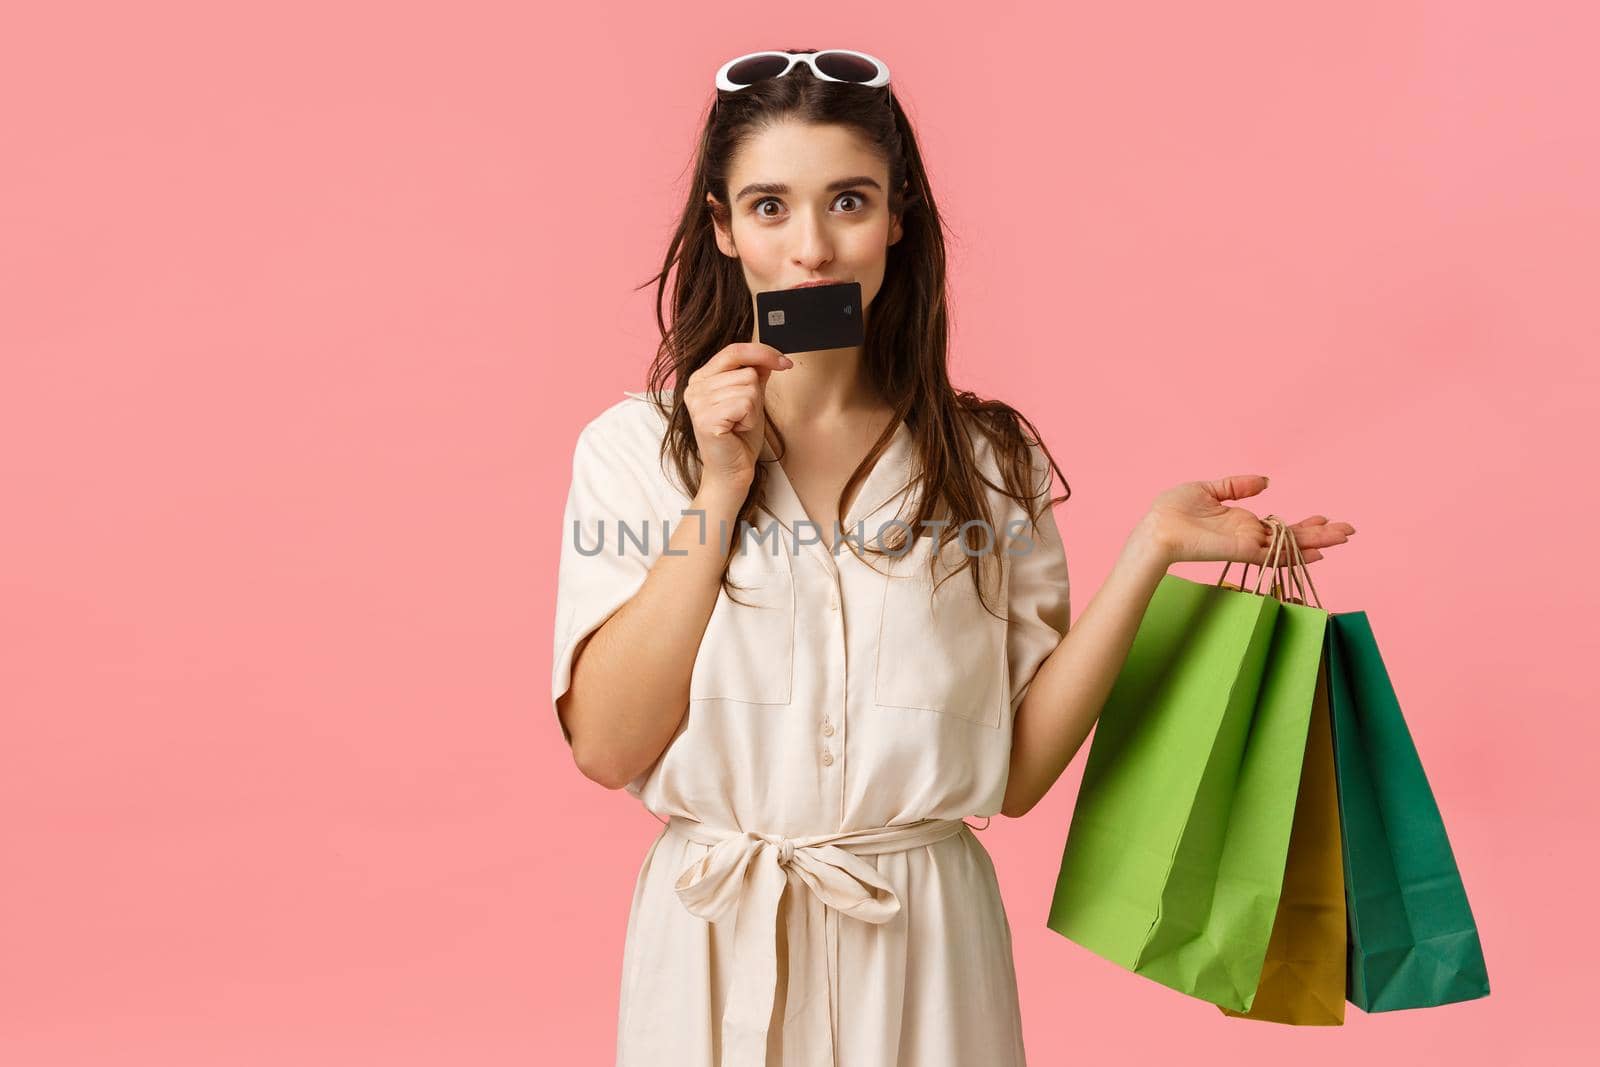 Girl likes wasting money on her credit card, kissing it and smiling joyfully, carrying shopping bags, shop in stores, getting new clothes, prepare gifts for girlfriends, standing pink background.